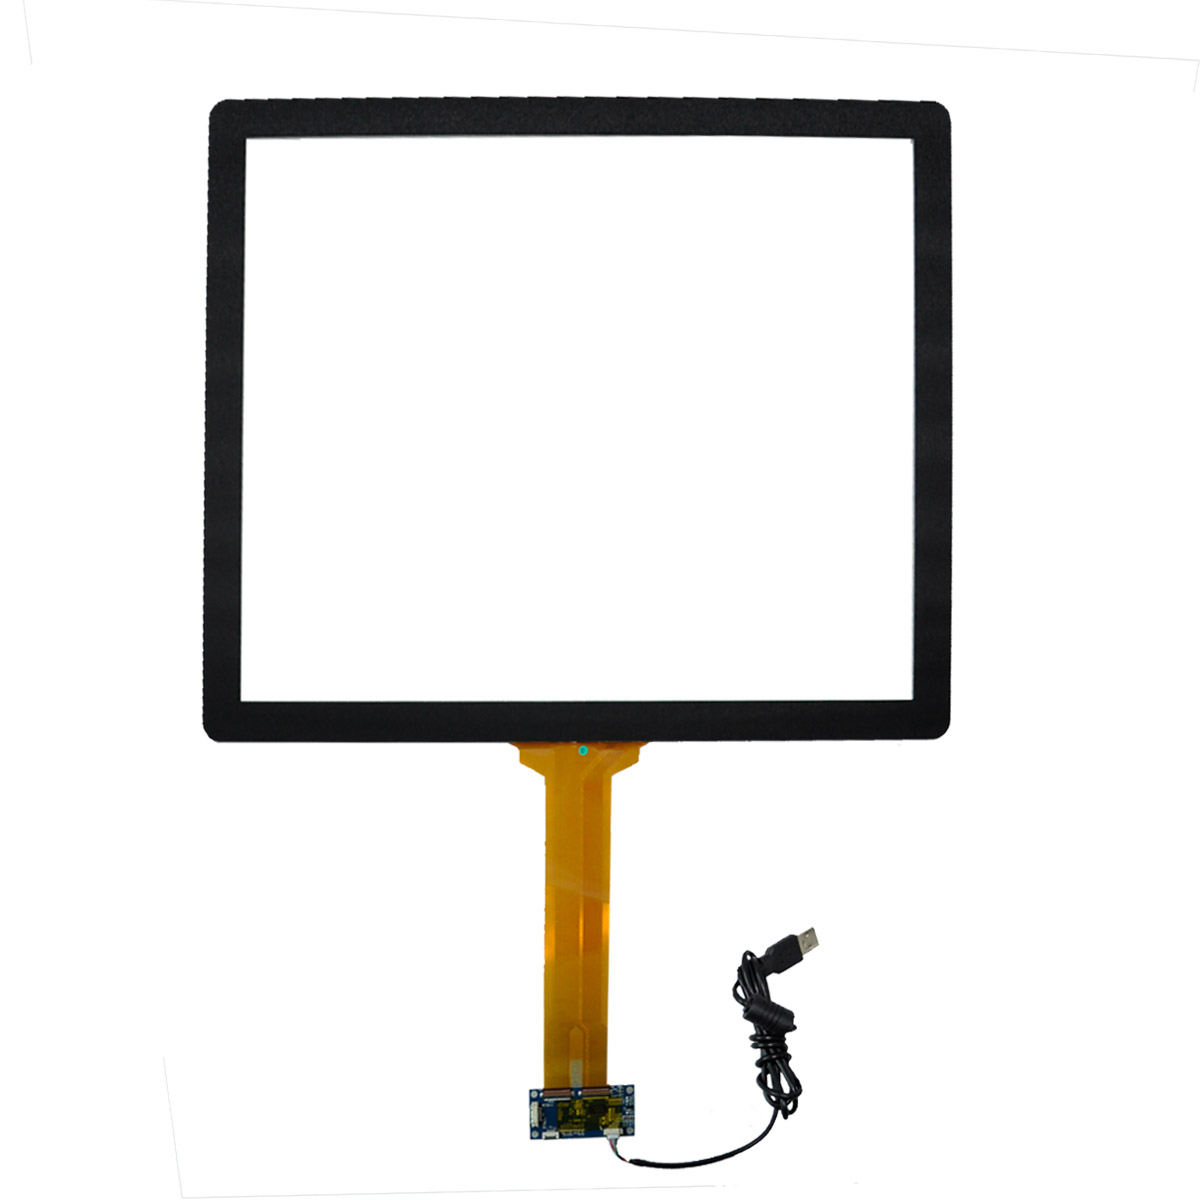 19 inch Projected Capacitive touch screen panel PCAP/PCT EETI/ilitek Controller 